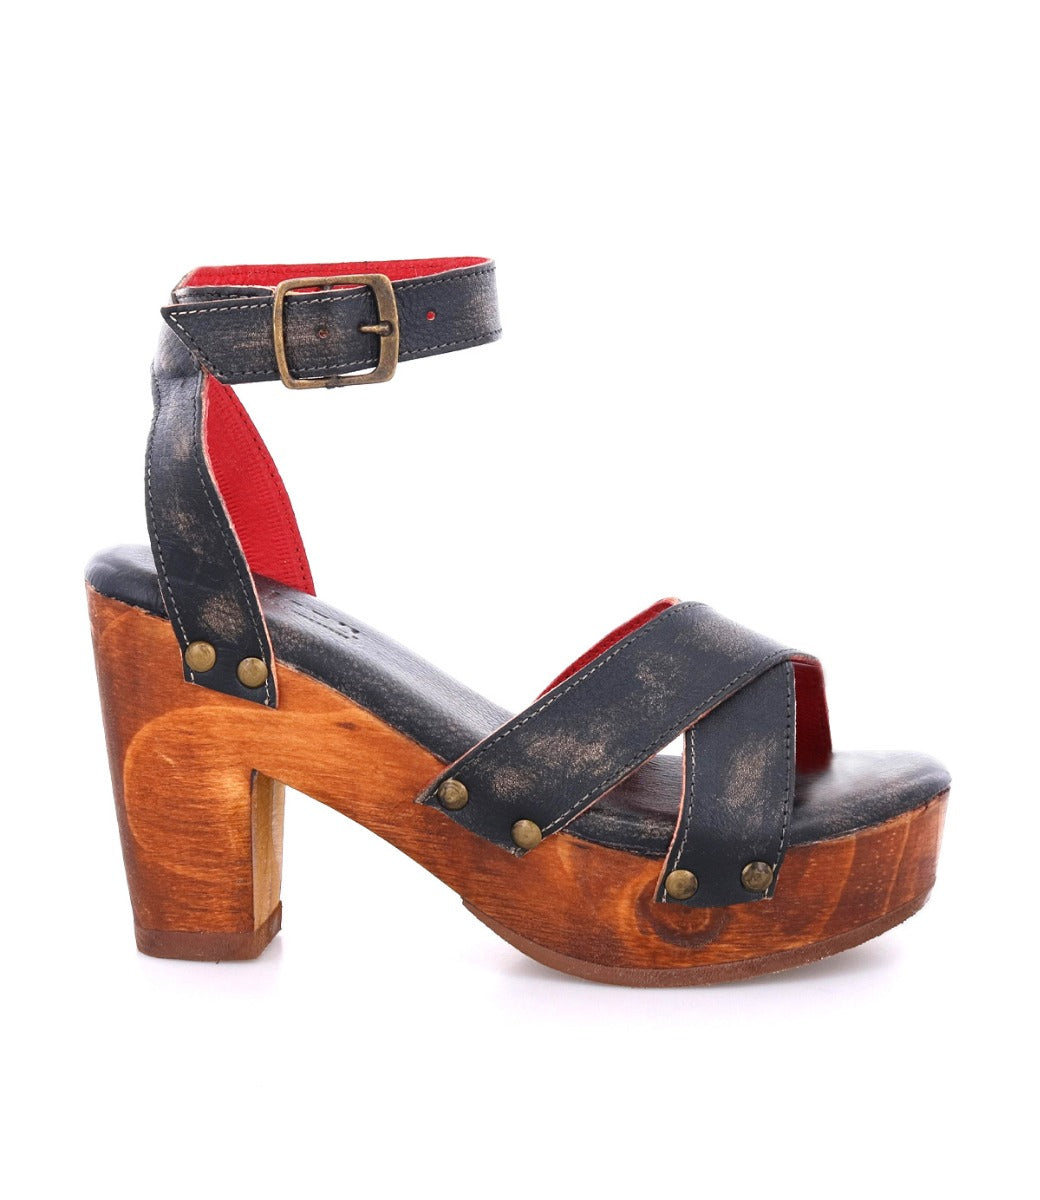 A women's Kalah sandal by Bed Stu with straps and wooden heel.